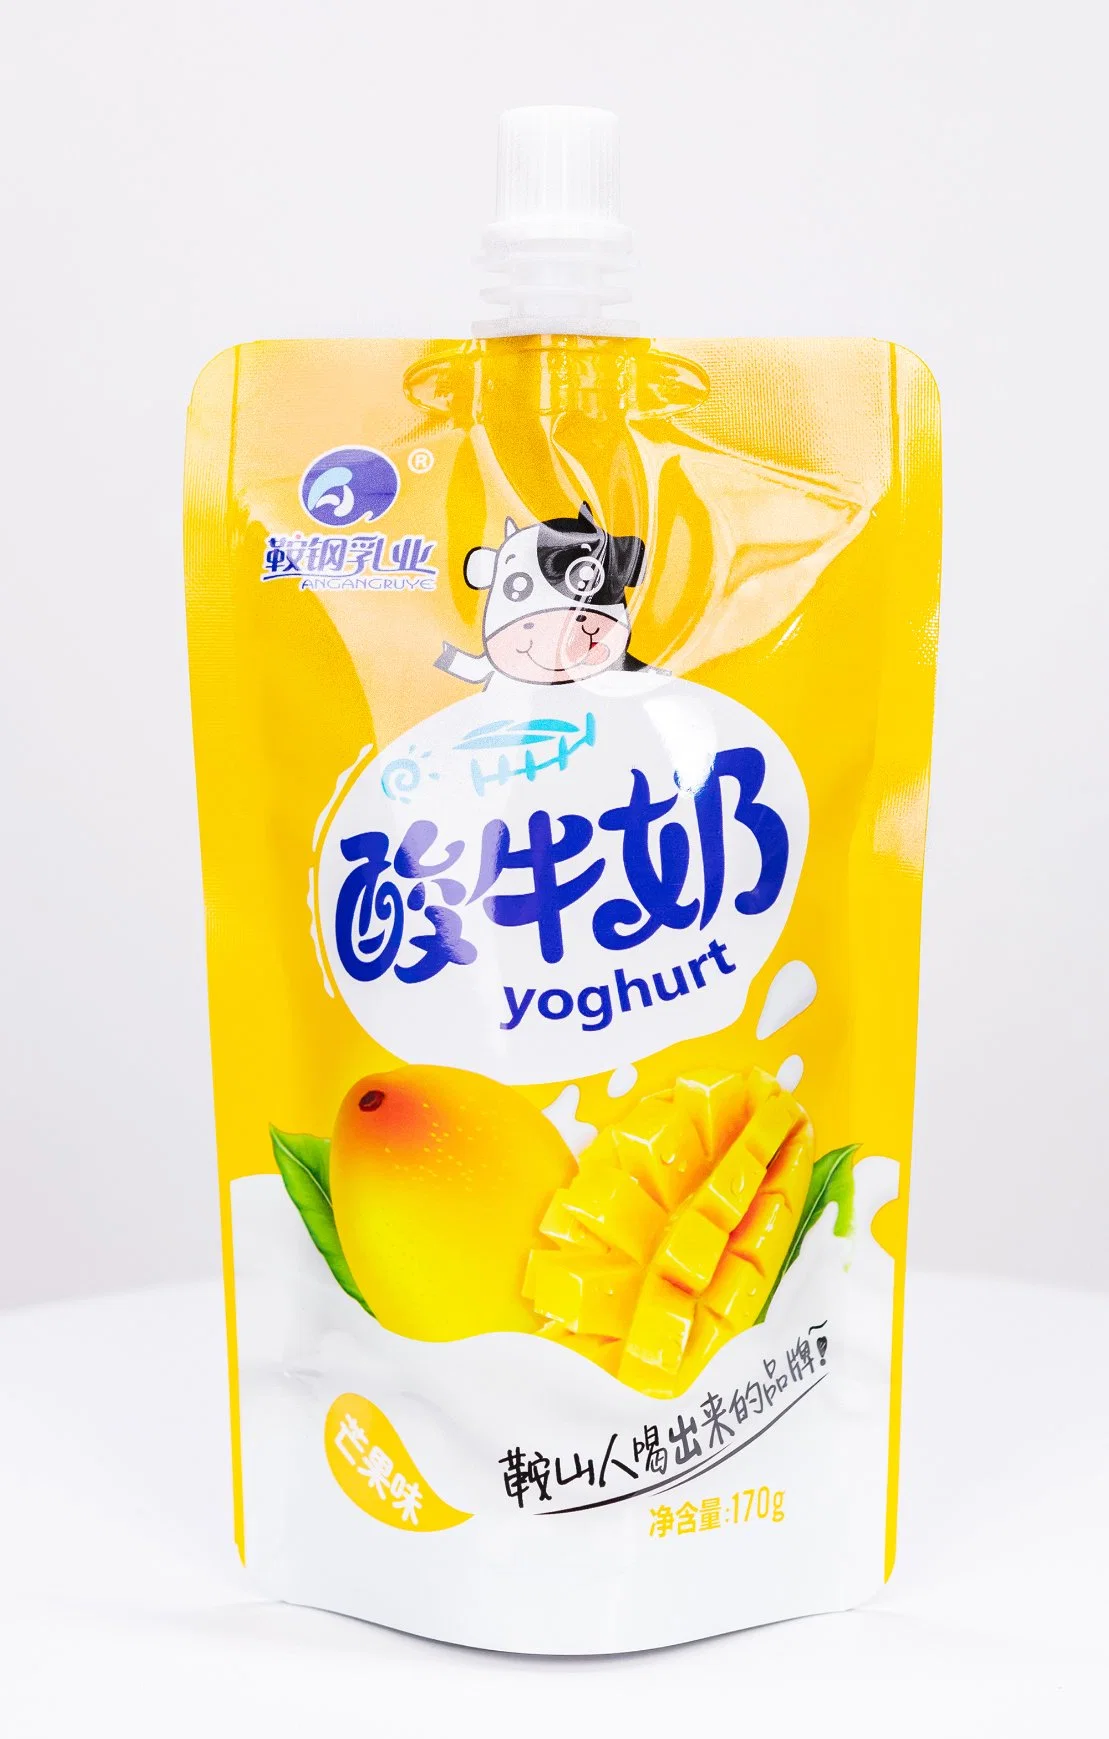 Food Grade Printing 218ml Standing up Pouches with Spout